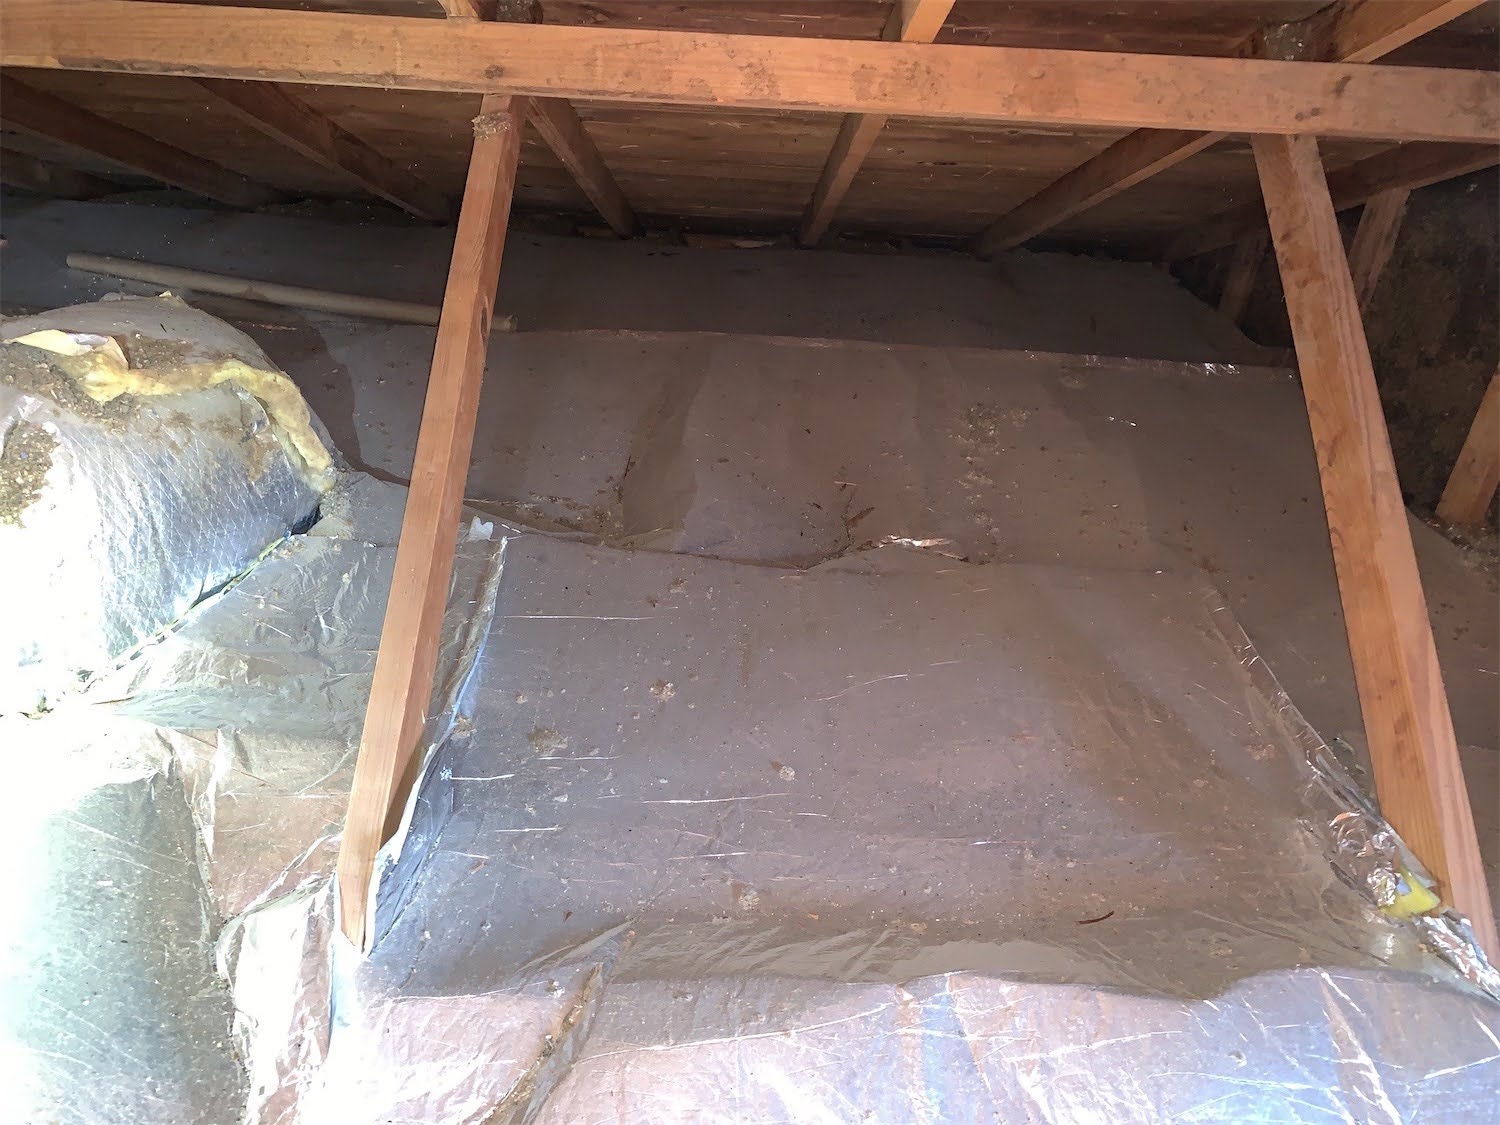 Radiant barrier laid on top of the insulation on the attic floor